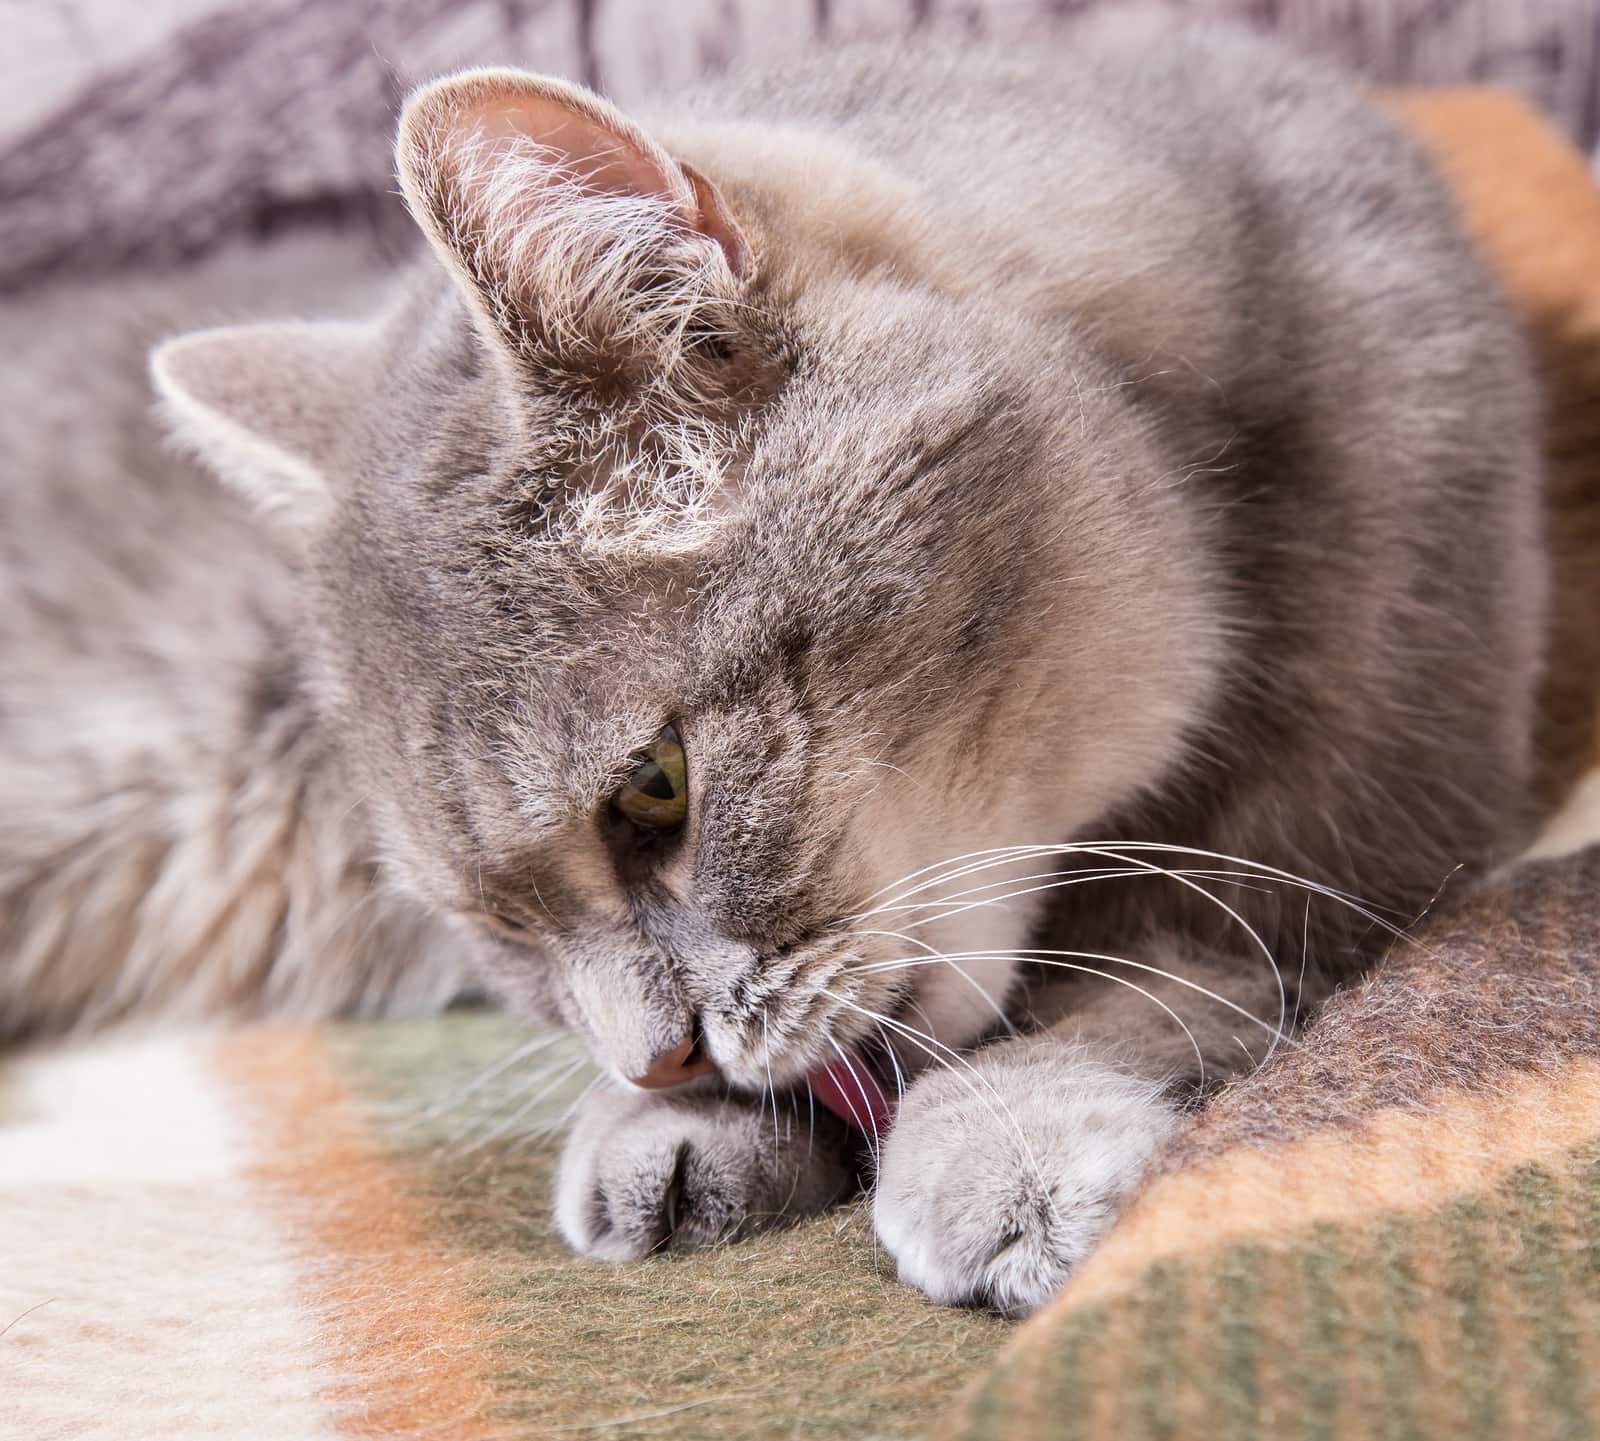 How to care for cat paw pads